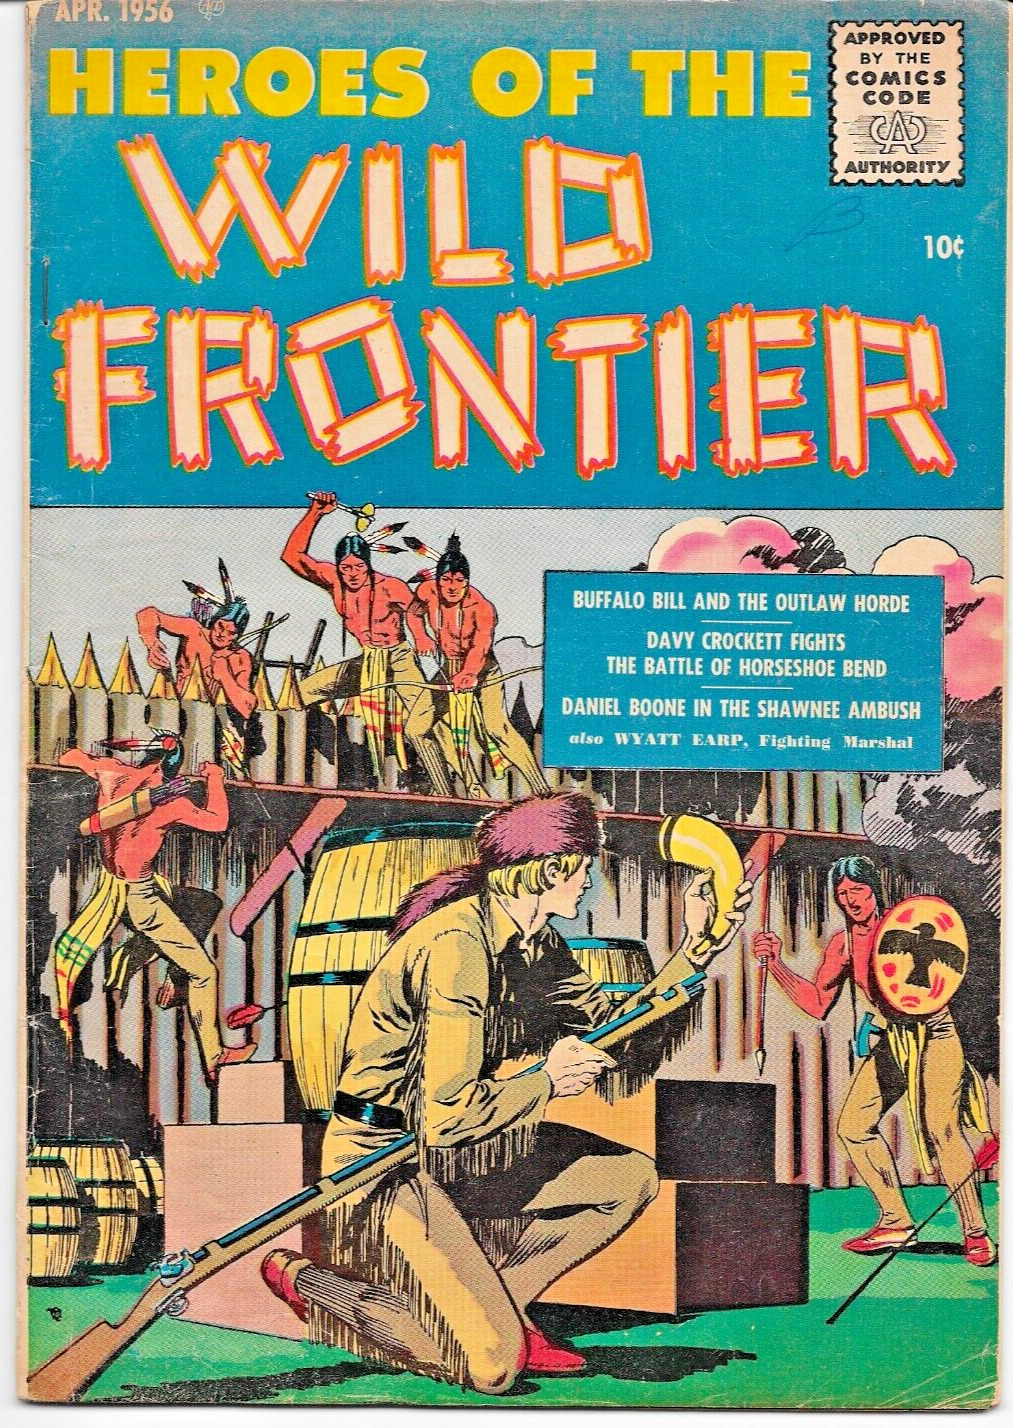 HEROES OF THE WILD FRONTIER #2 (April 1956) Ace Publications - Daniel Boone VG